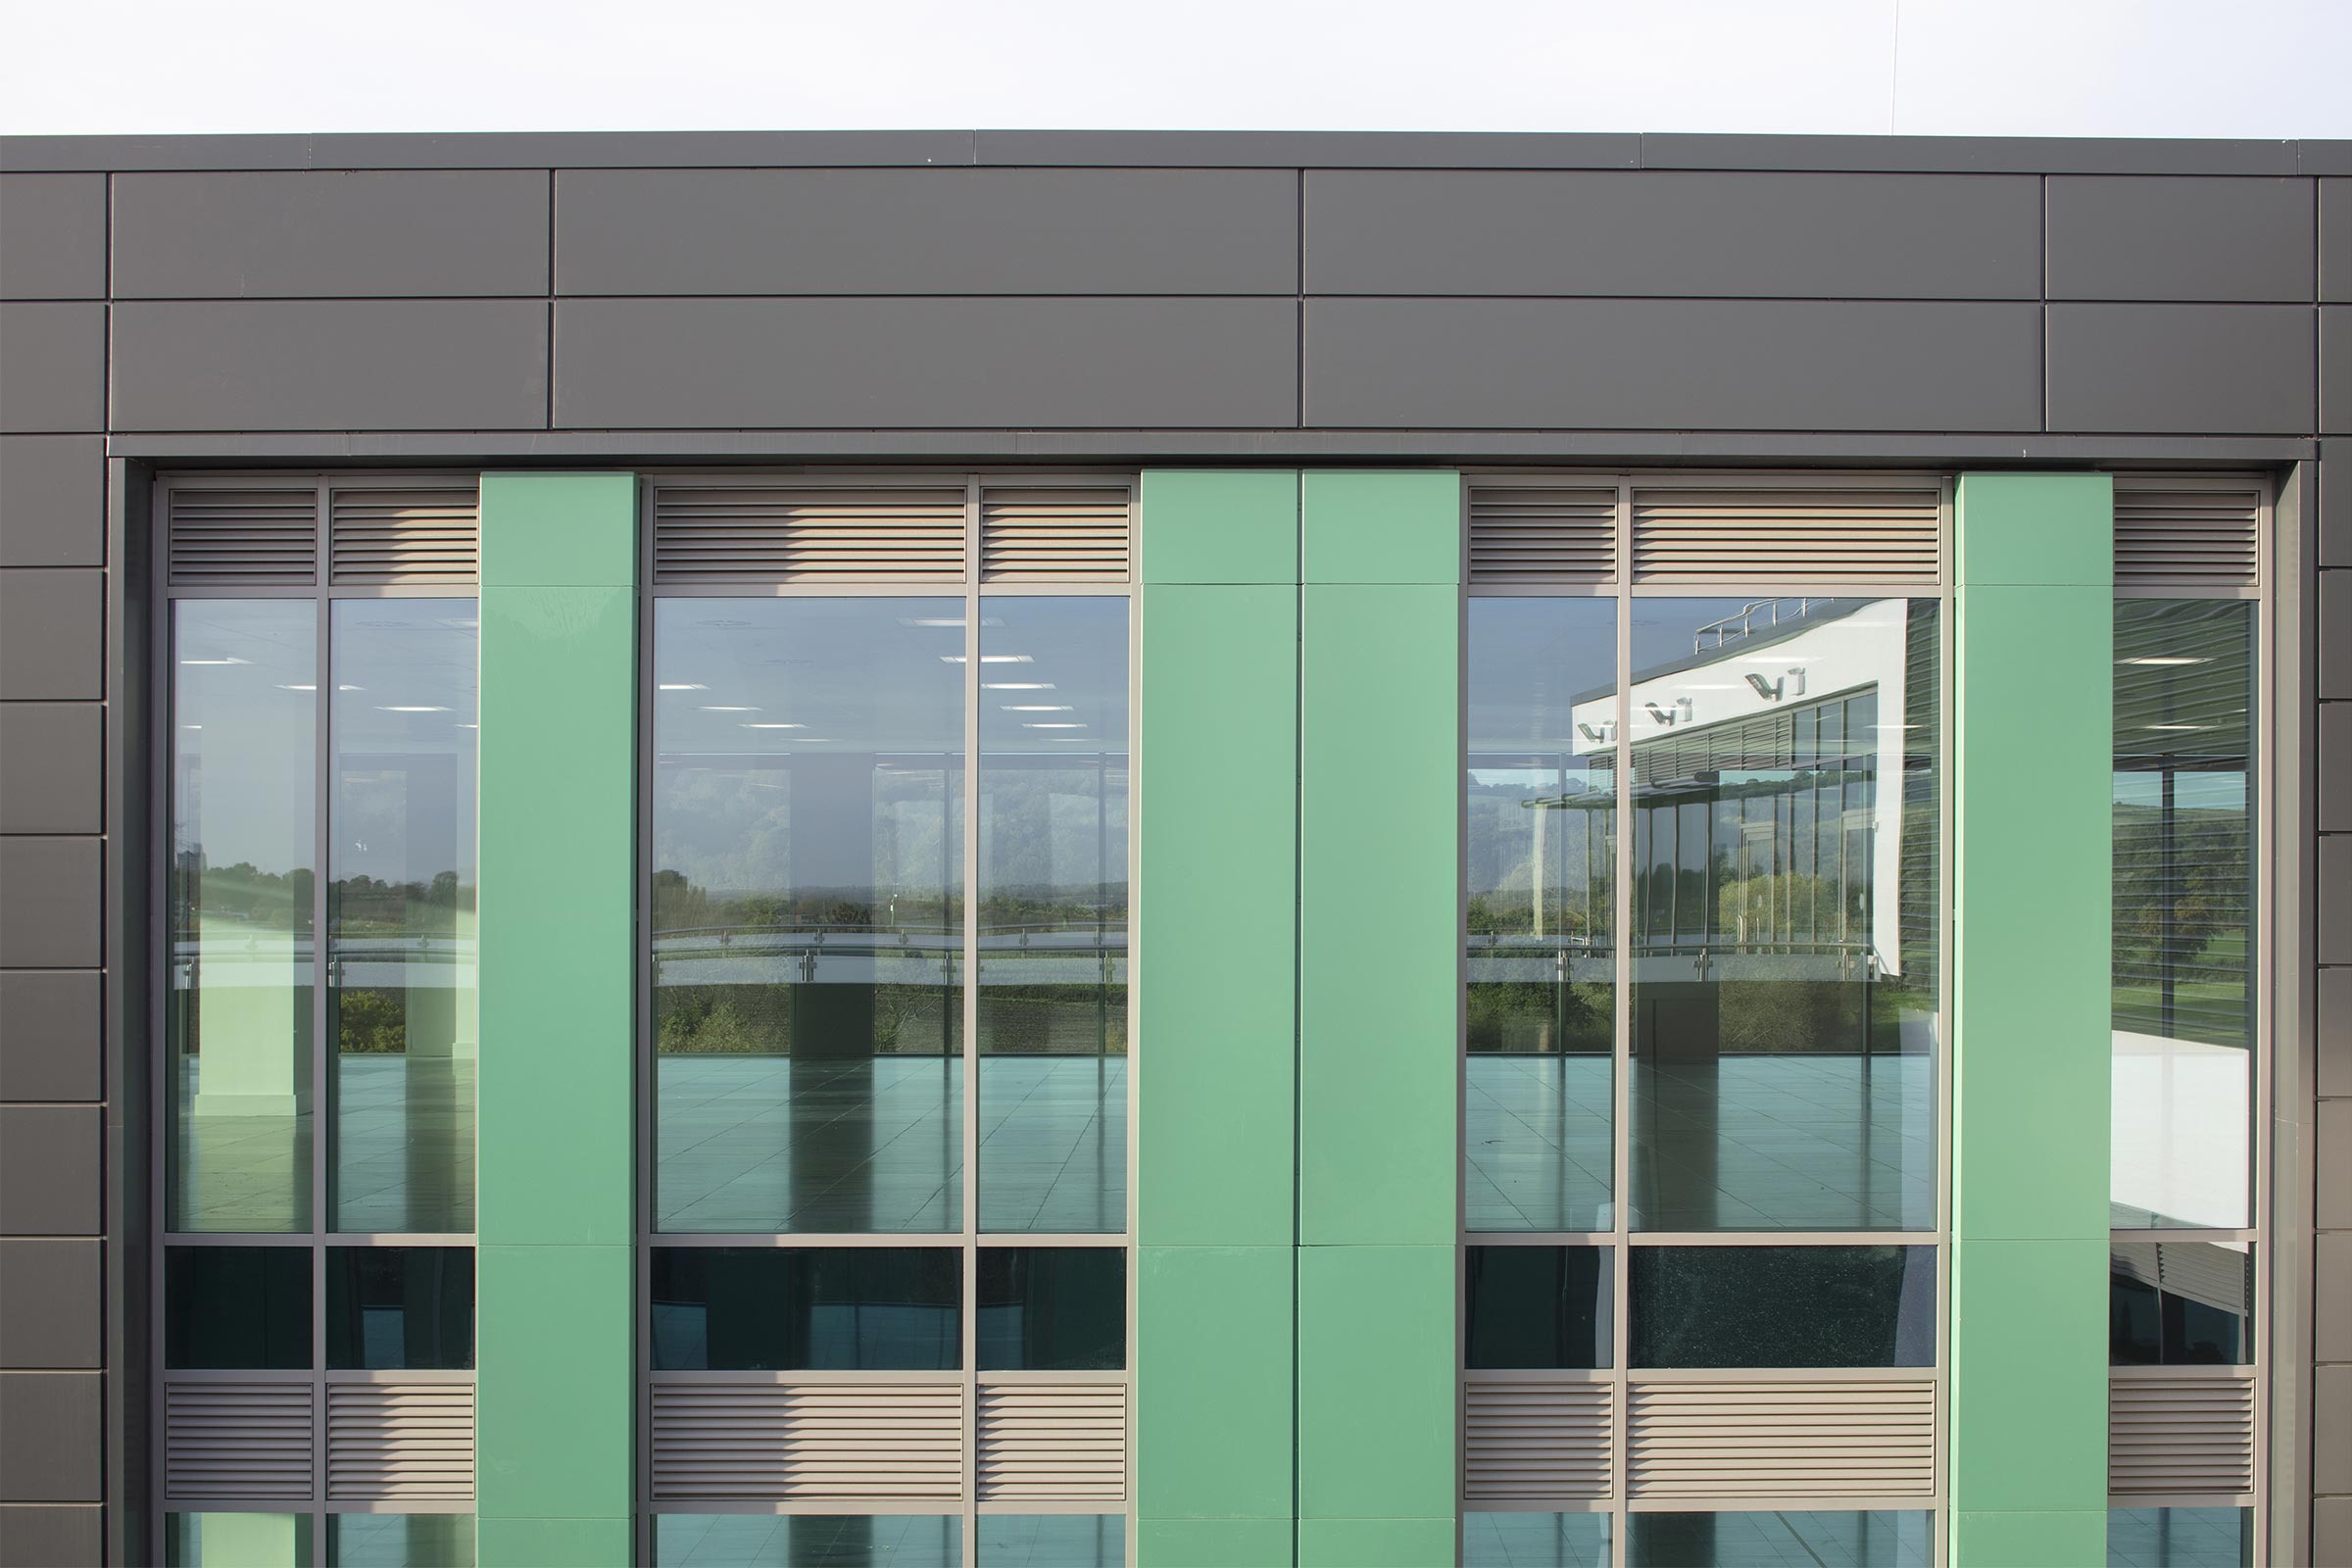 Deliver more Sustainable Buildings through good design and the right materials [Blog]